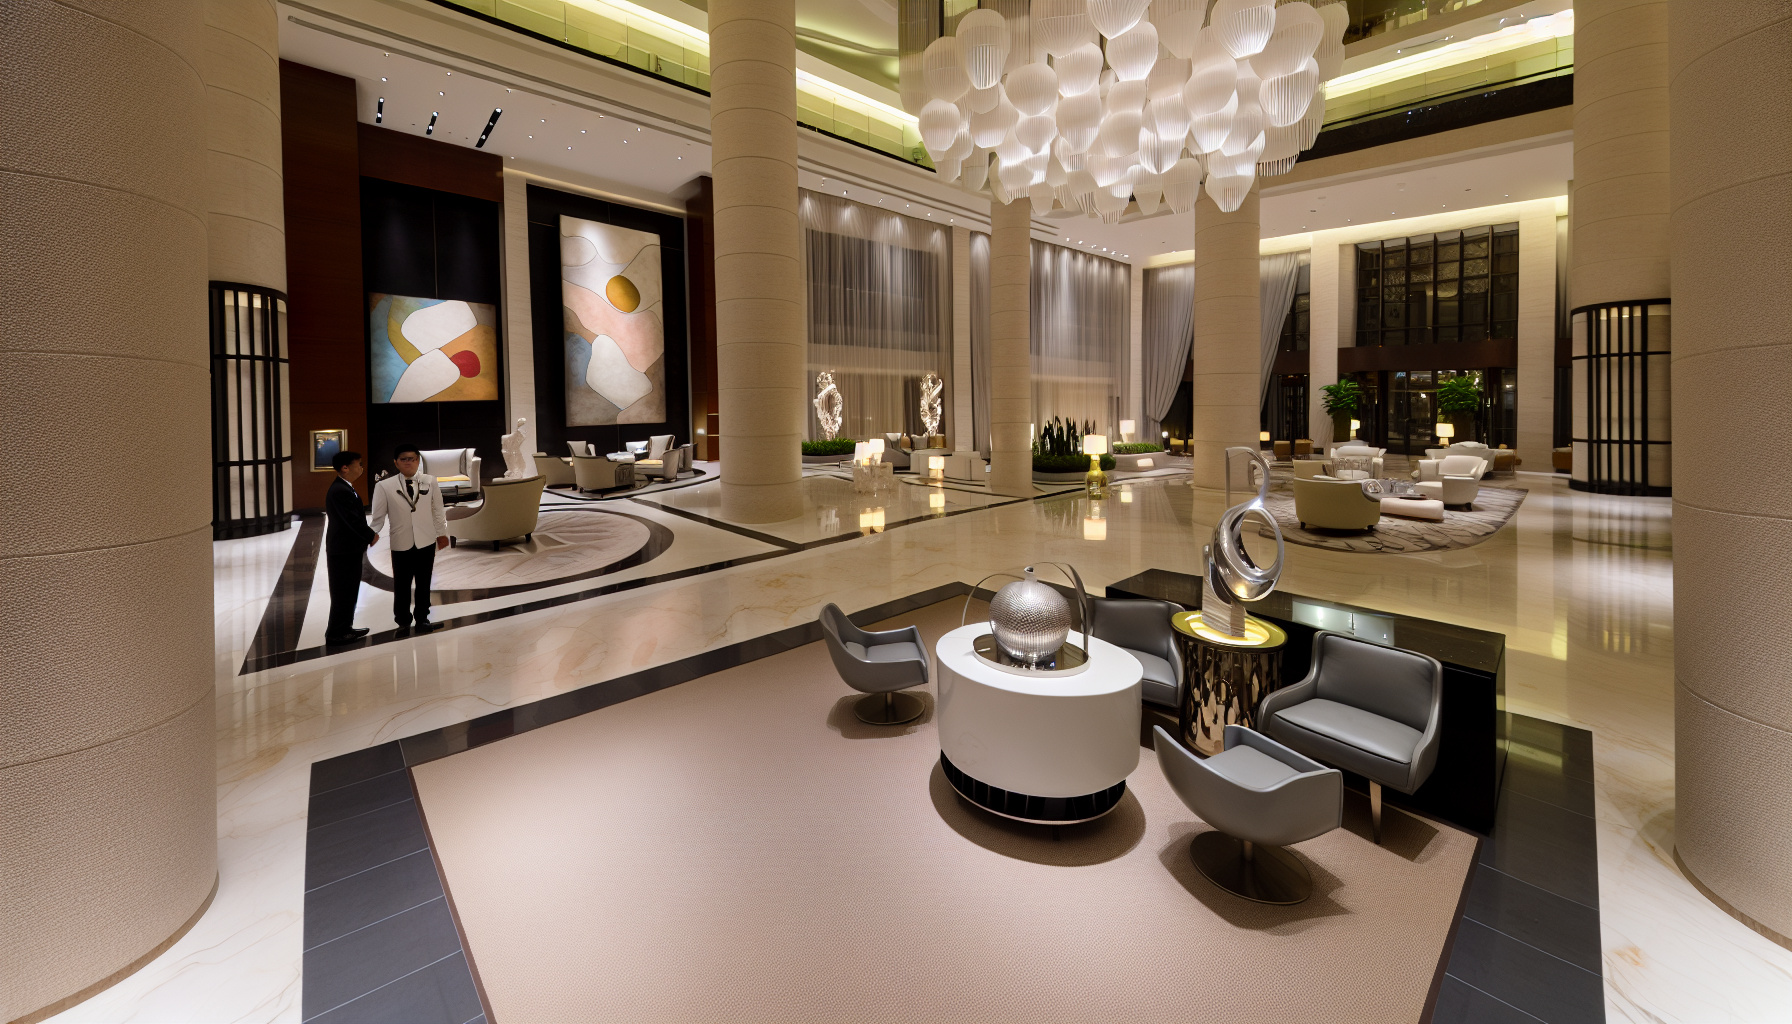 Luxurious hotel lobby with modern decor and ambient lighting